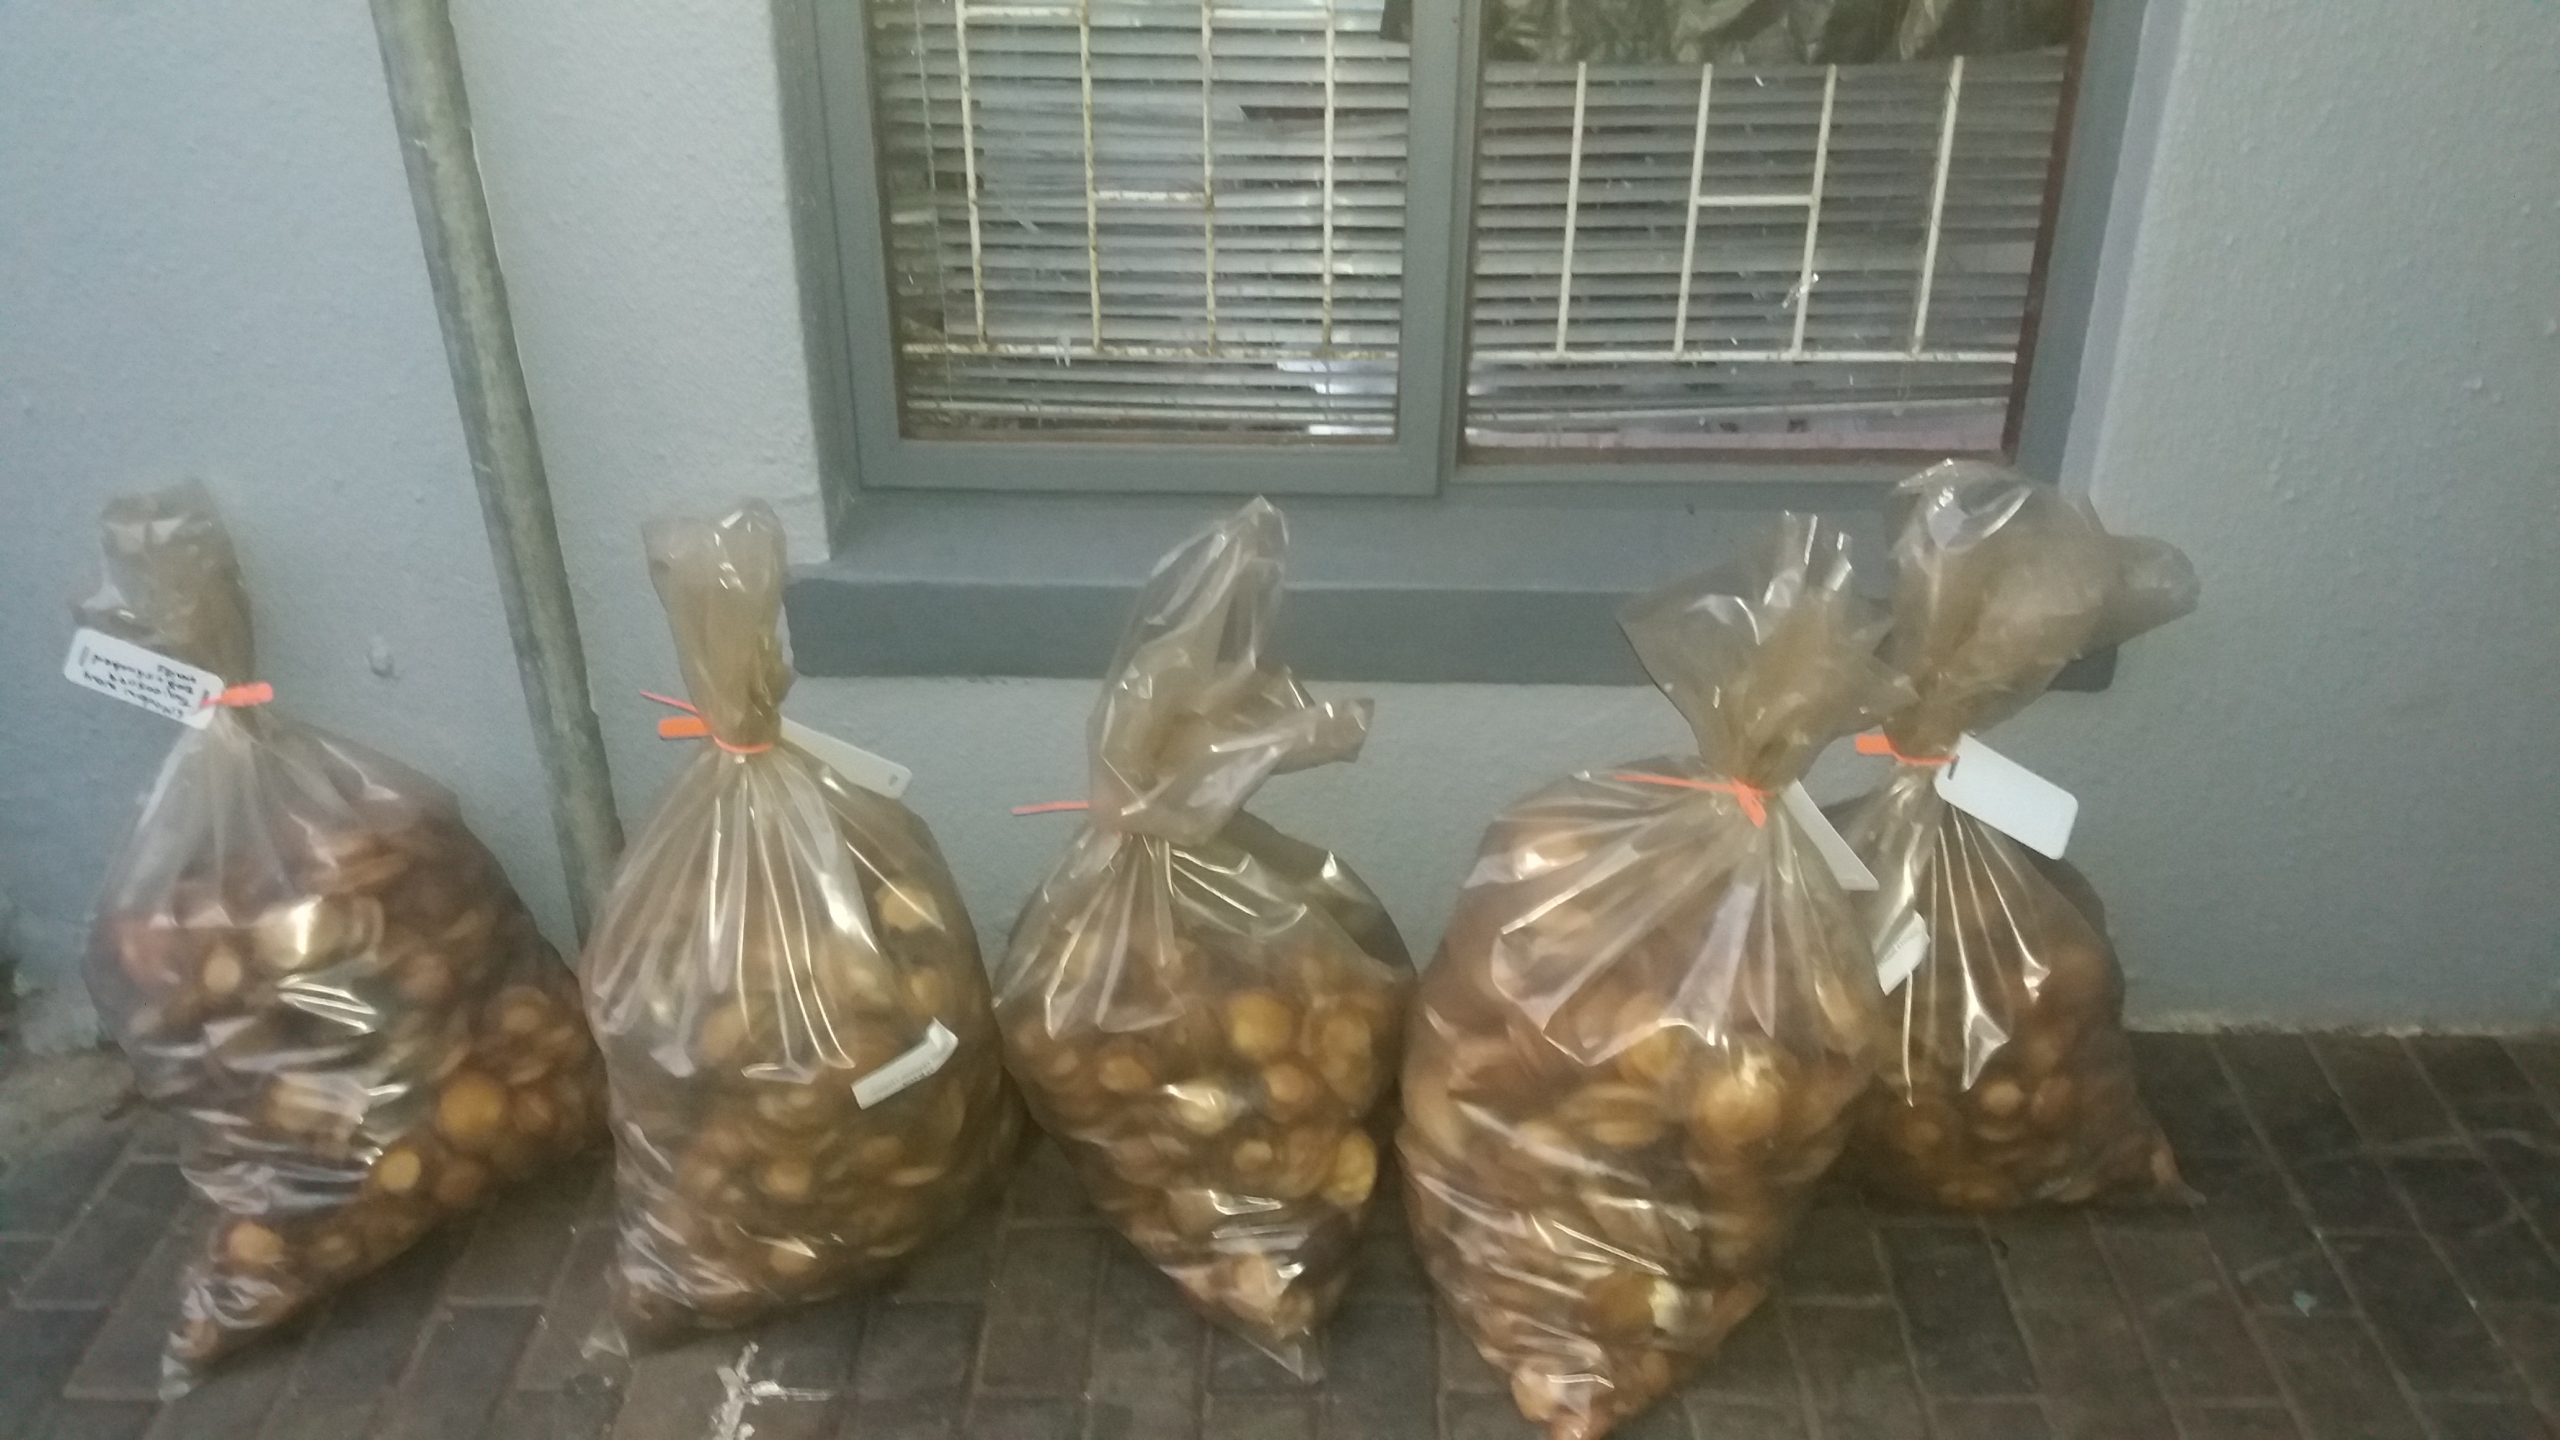 Suspect arrested for possession of crayfish worth R3.5 million